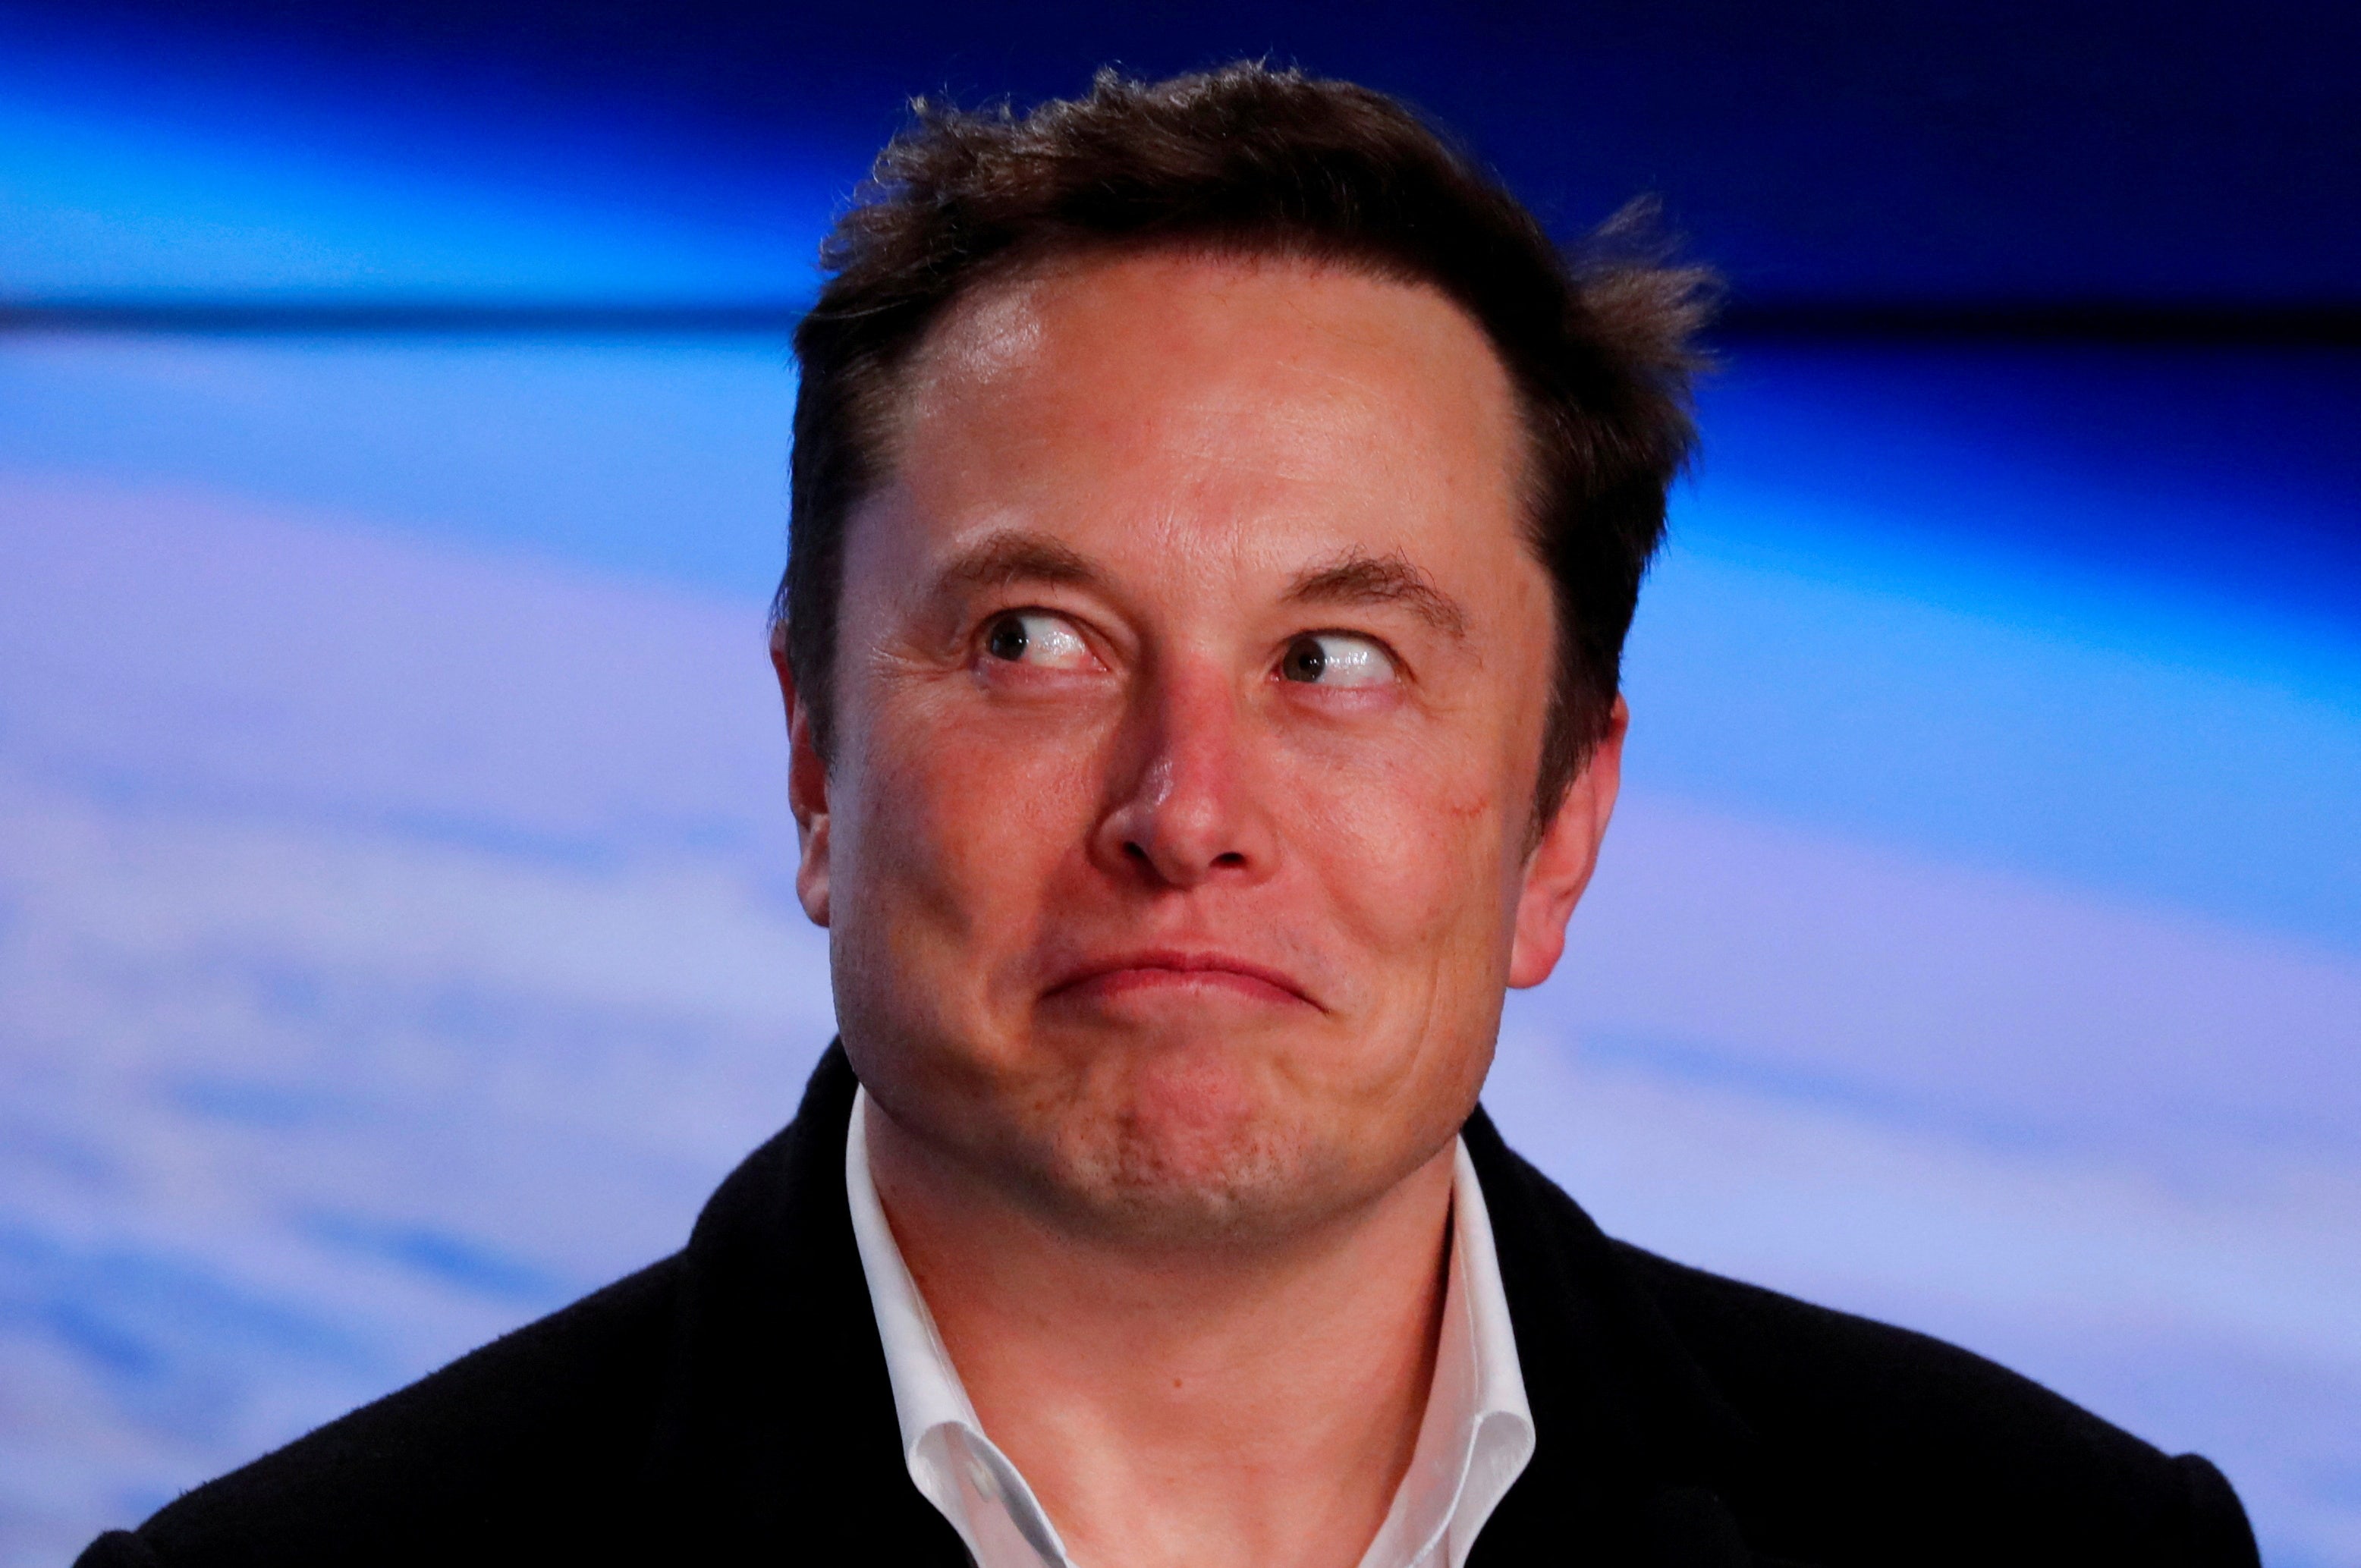 Liberal professor loses it over Elon Musk's Twitter polls: For the next poll he can 'shove it up his a--'